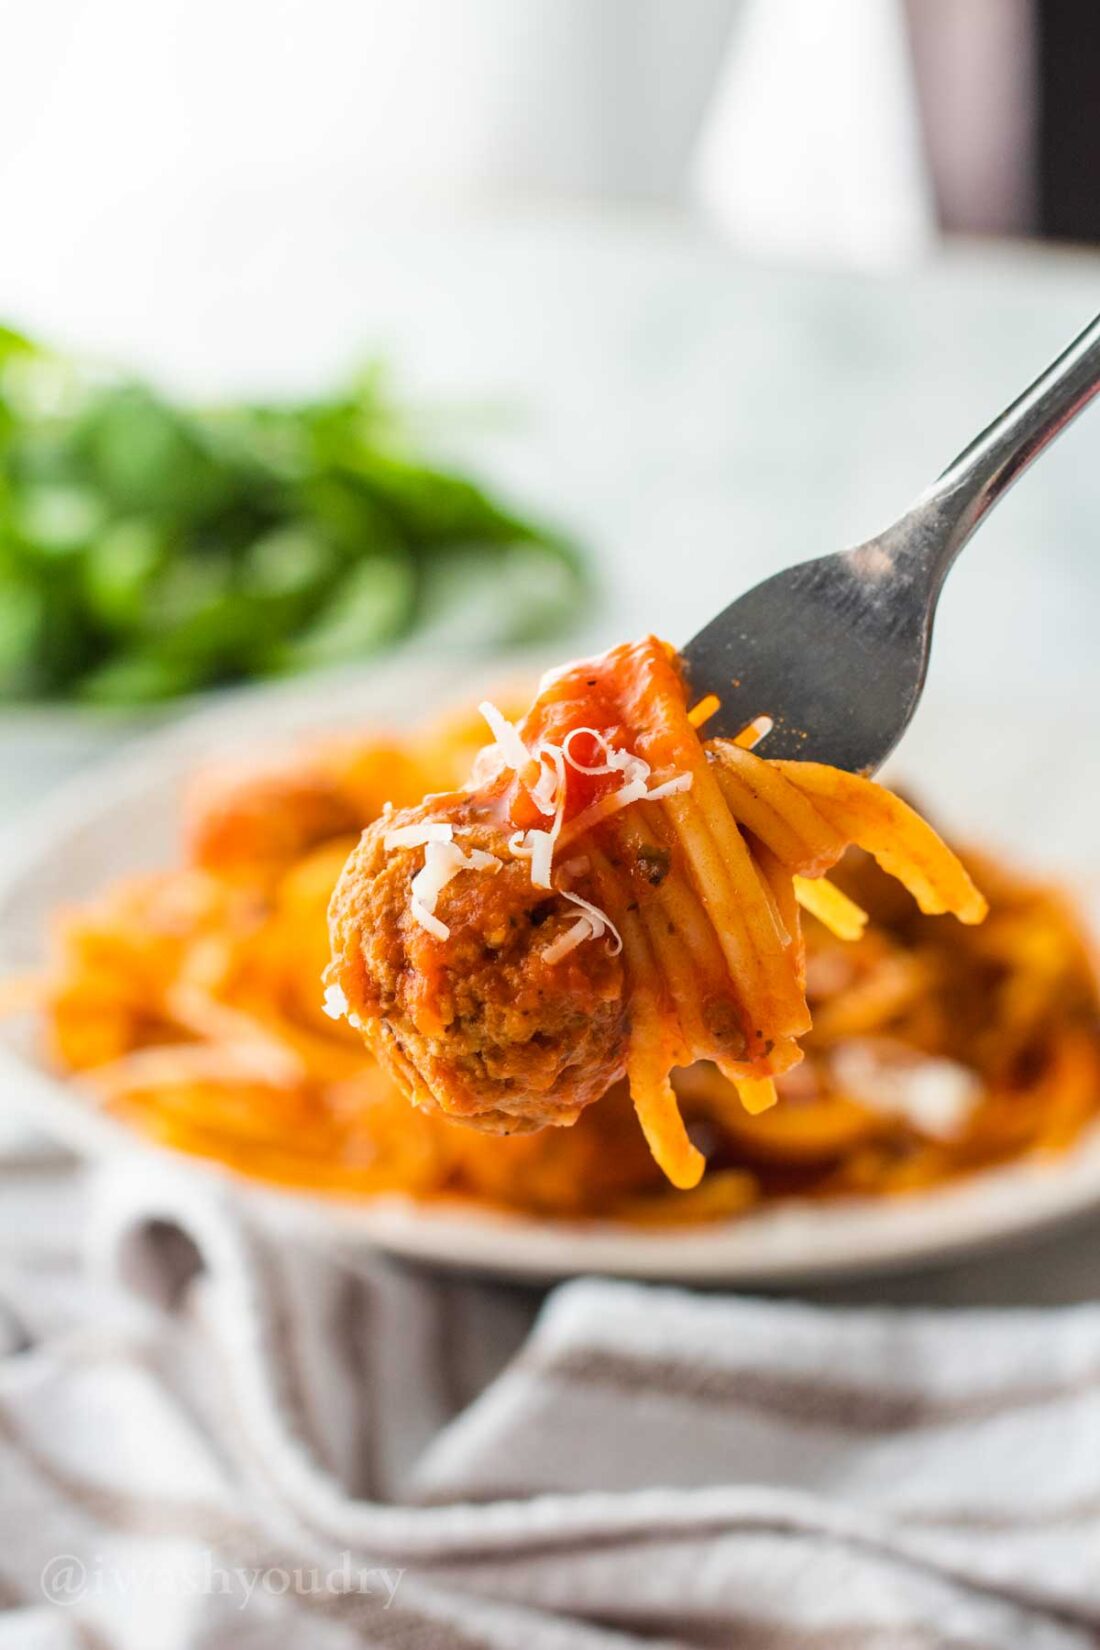 Bite of spaghetti and meatballs on a fork.